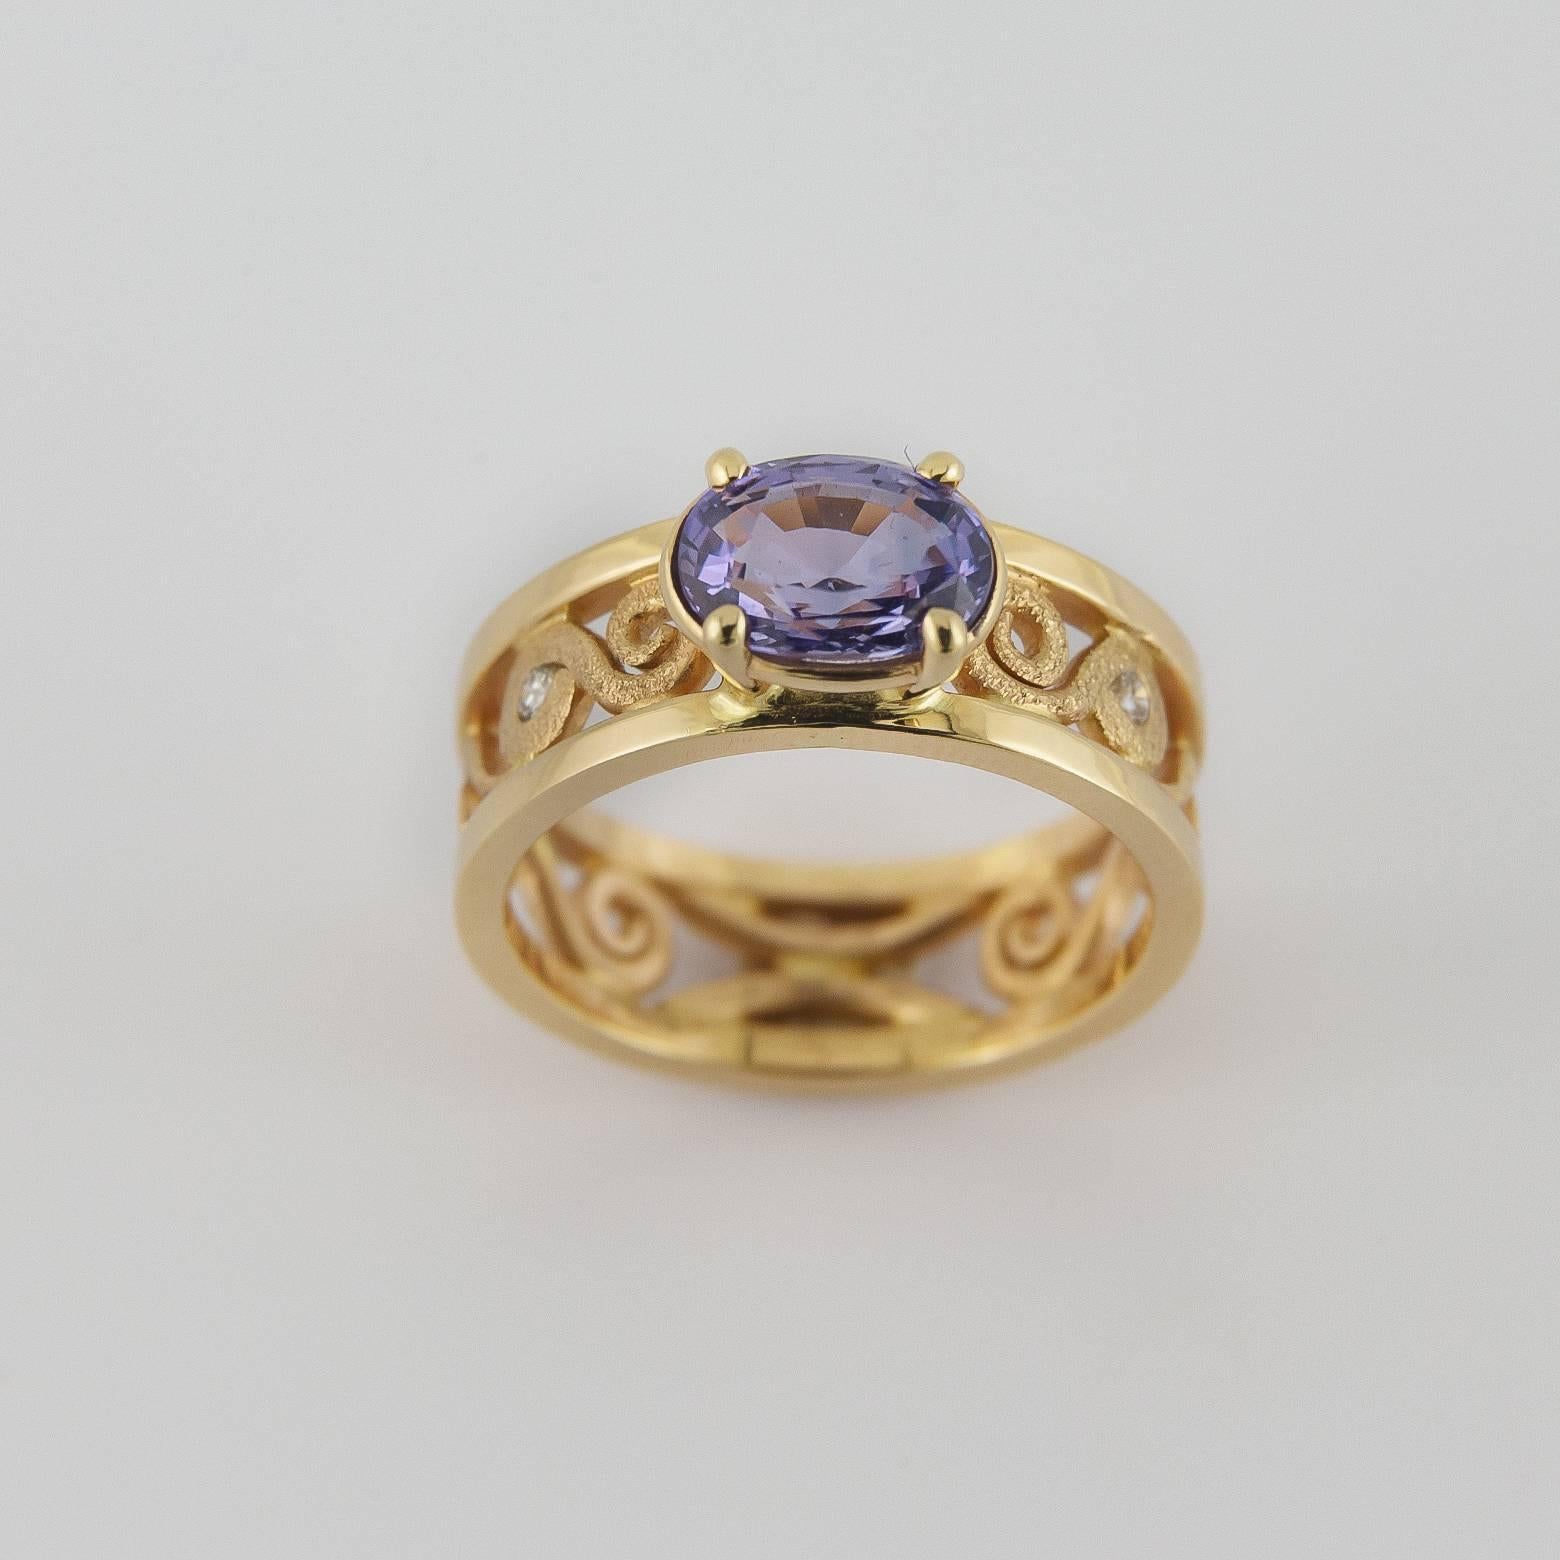 This light purple blue indigo sapphire spiral ring is dazzling! The boldness of the band is complimented by the textured spirals and adds such luxury to a stunning one of a kind piece. The sapphire is 2.14 carats and the 2 diamonds on the side give